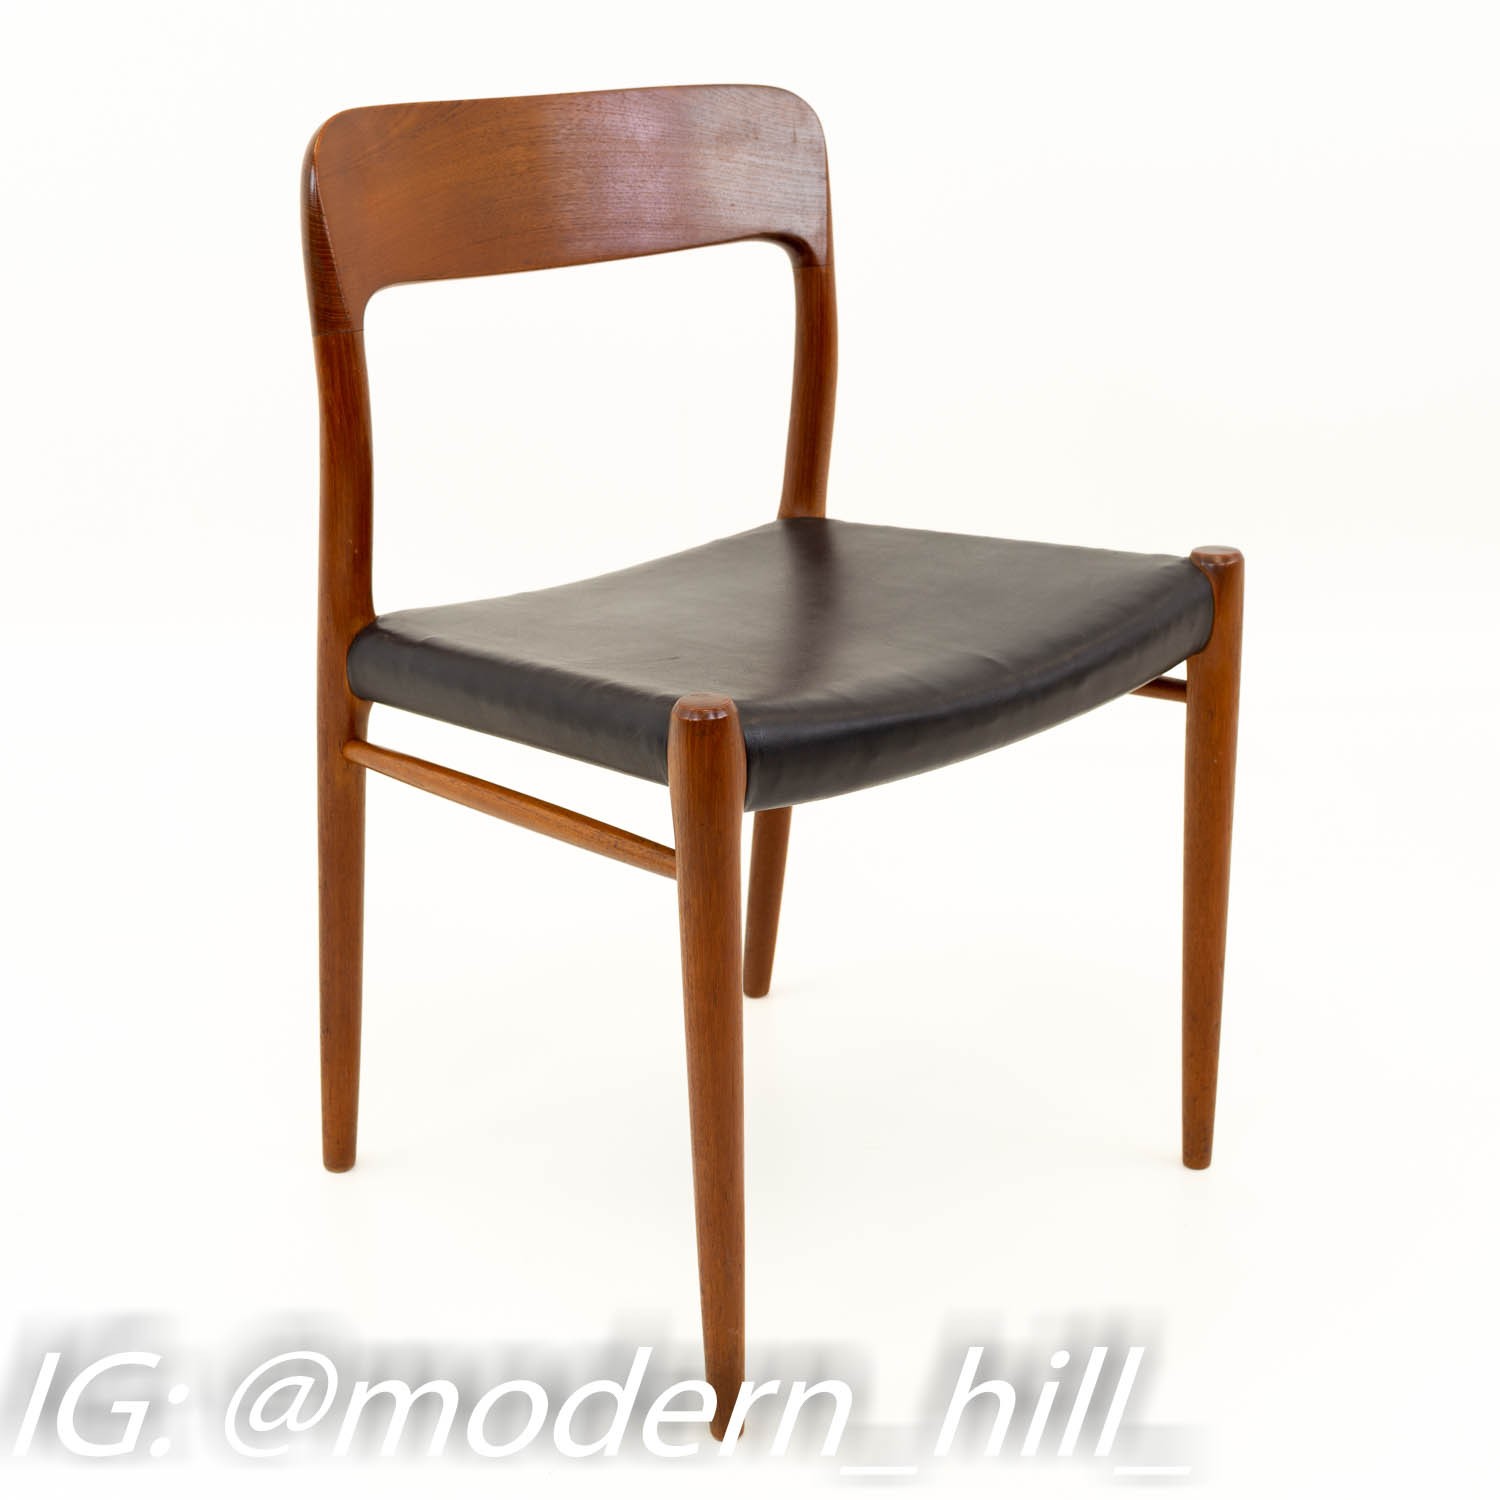 Niels Moller No. 75 Mid Century Modern Dining Chairs - Set of 6